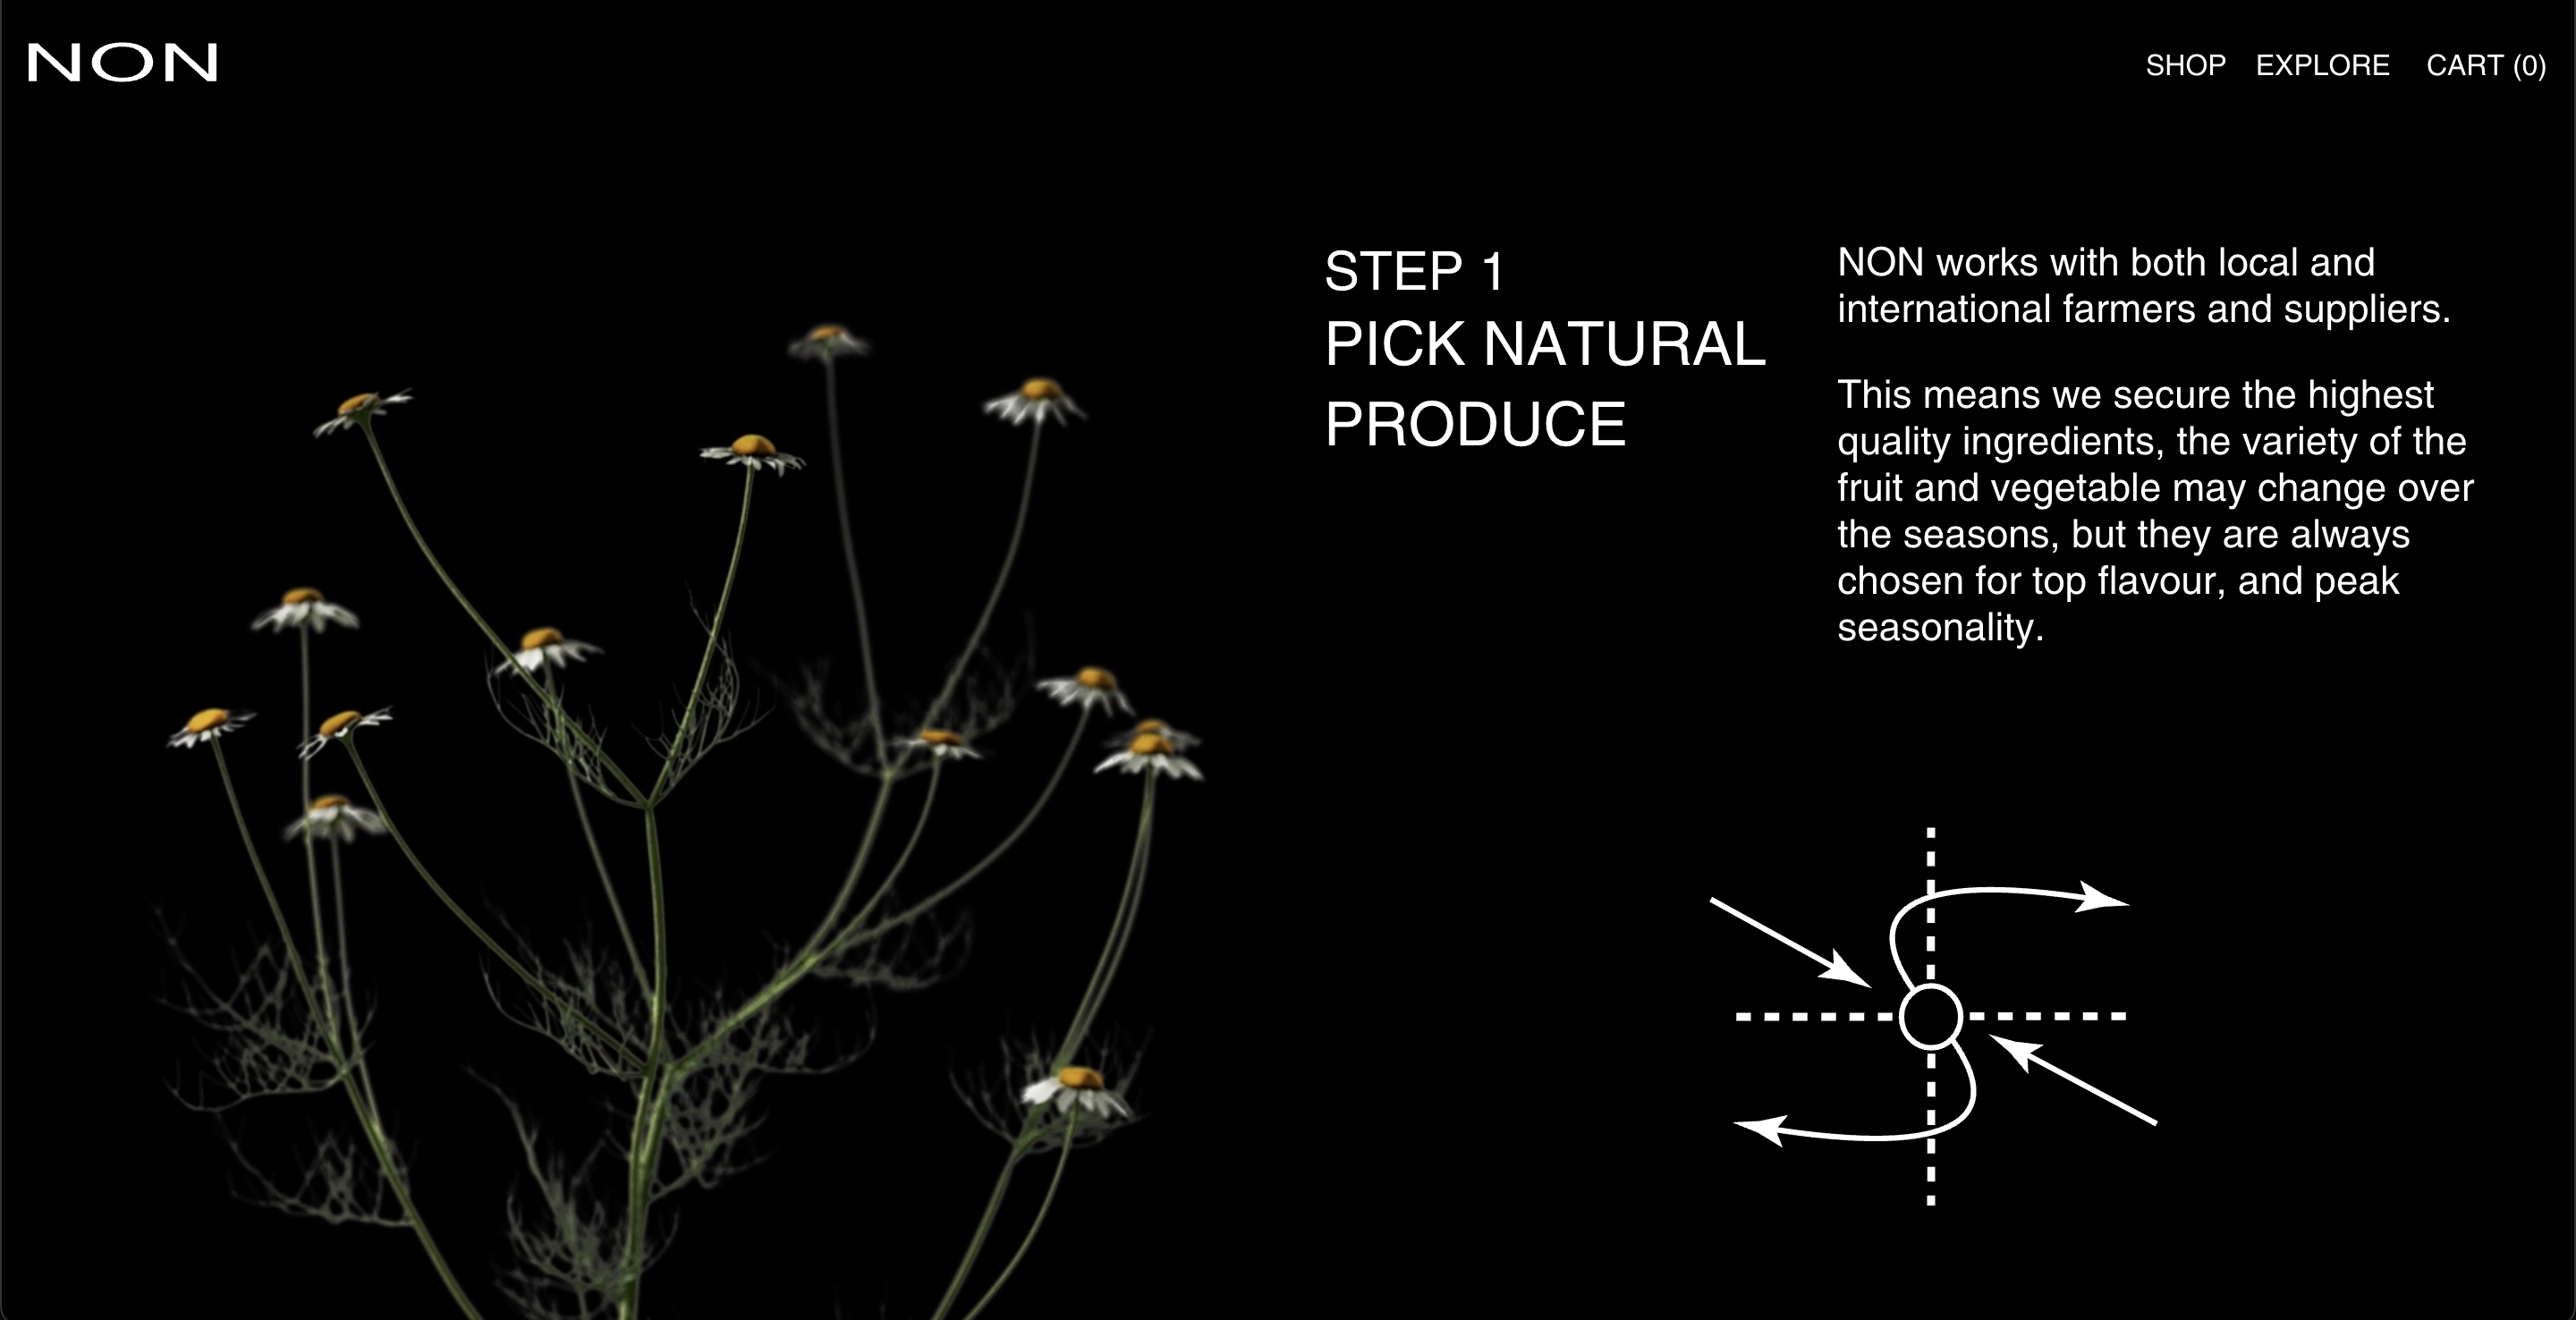 Non, a global non-alcoholic drinks ecommerce brand, presents a sleek homepage. Screenshot shows black background with image of dainty white flowers and green stem on left hand side. In the top right there is some text outlining Step 1 of the process and beneath this is a line drawing representing this stage of the process. A non-alcoholic drinks ecommerce brand using graphics creatively.